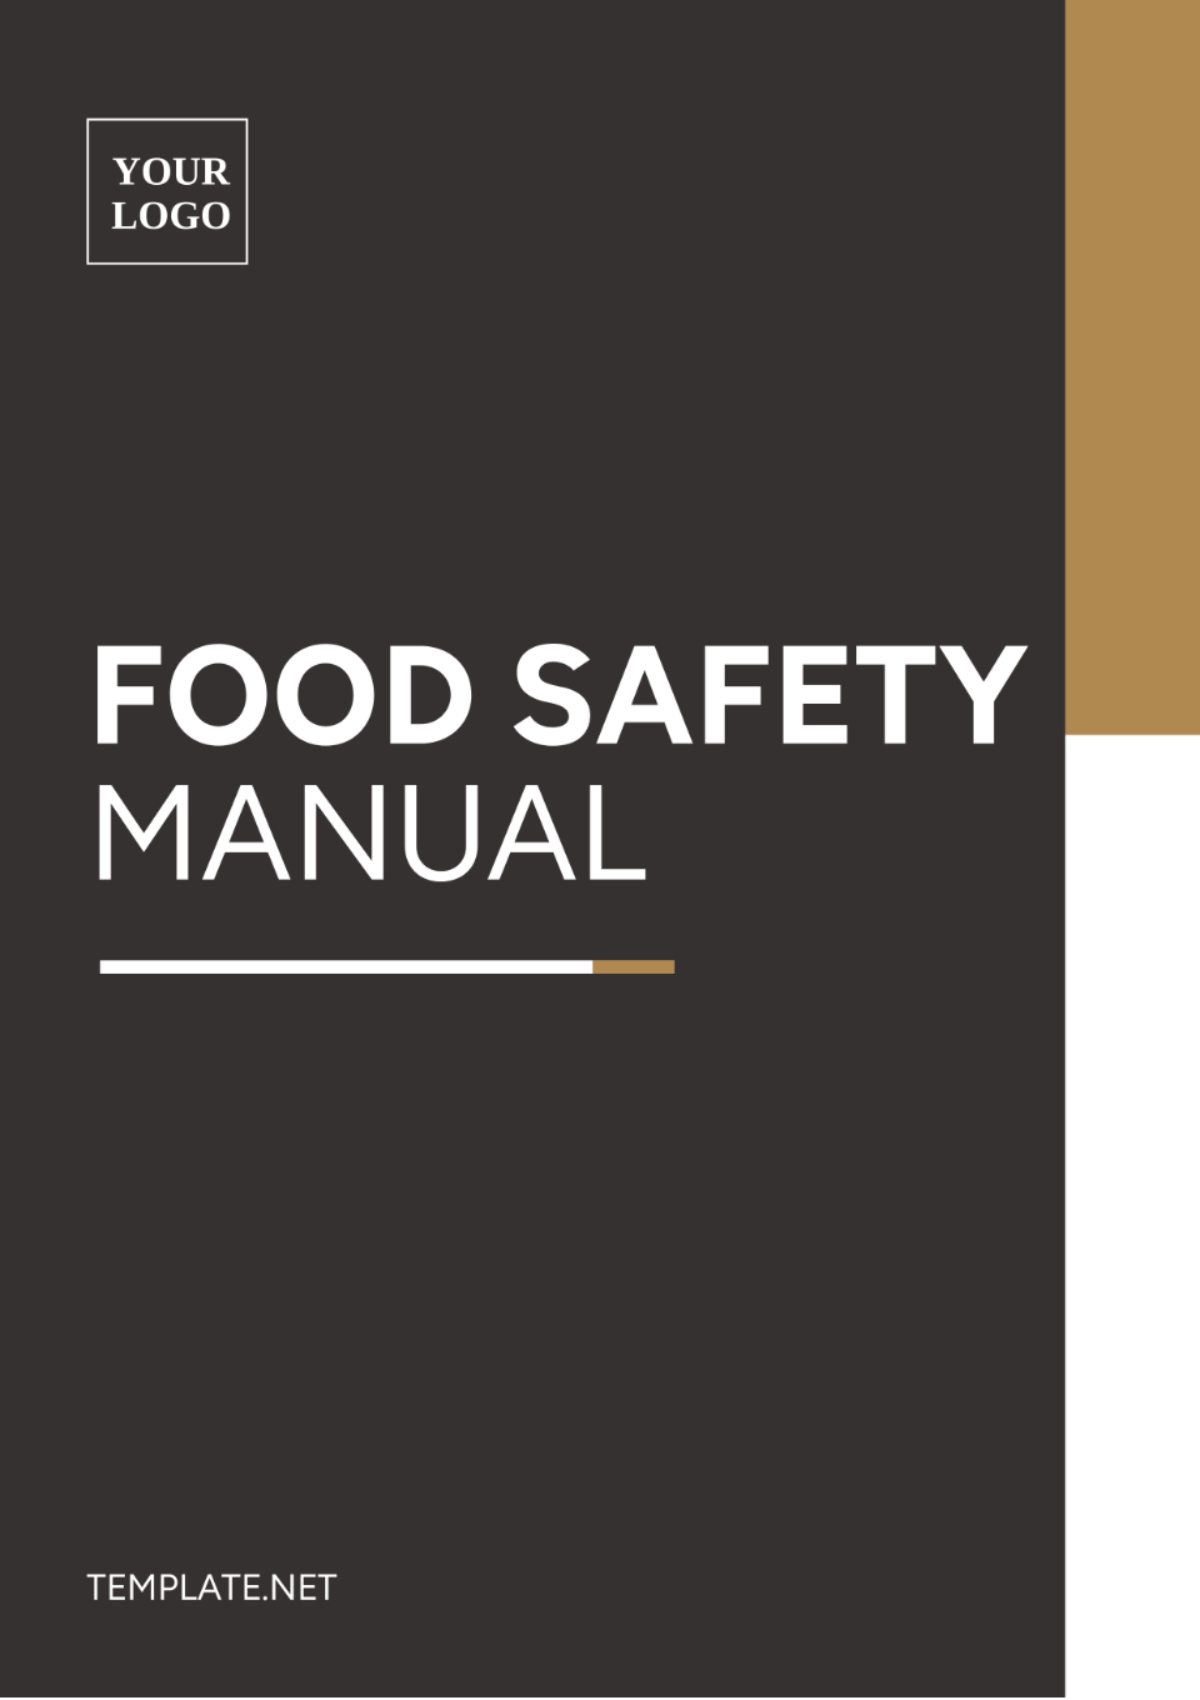 Food Safety Manual Template